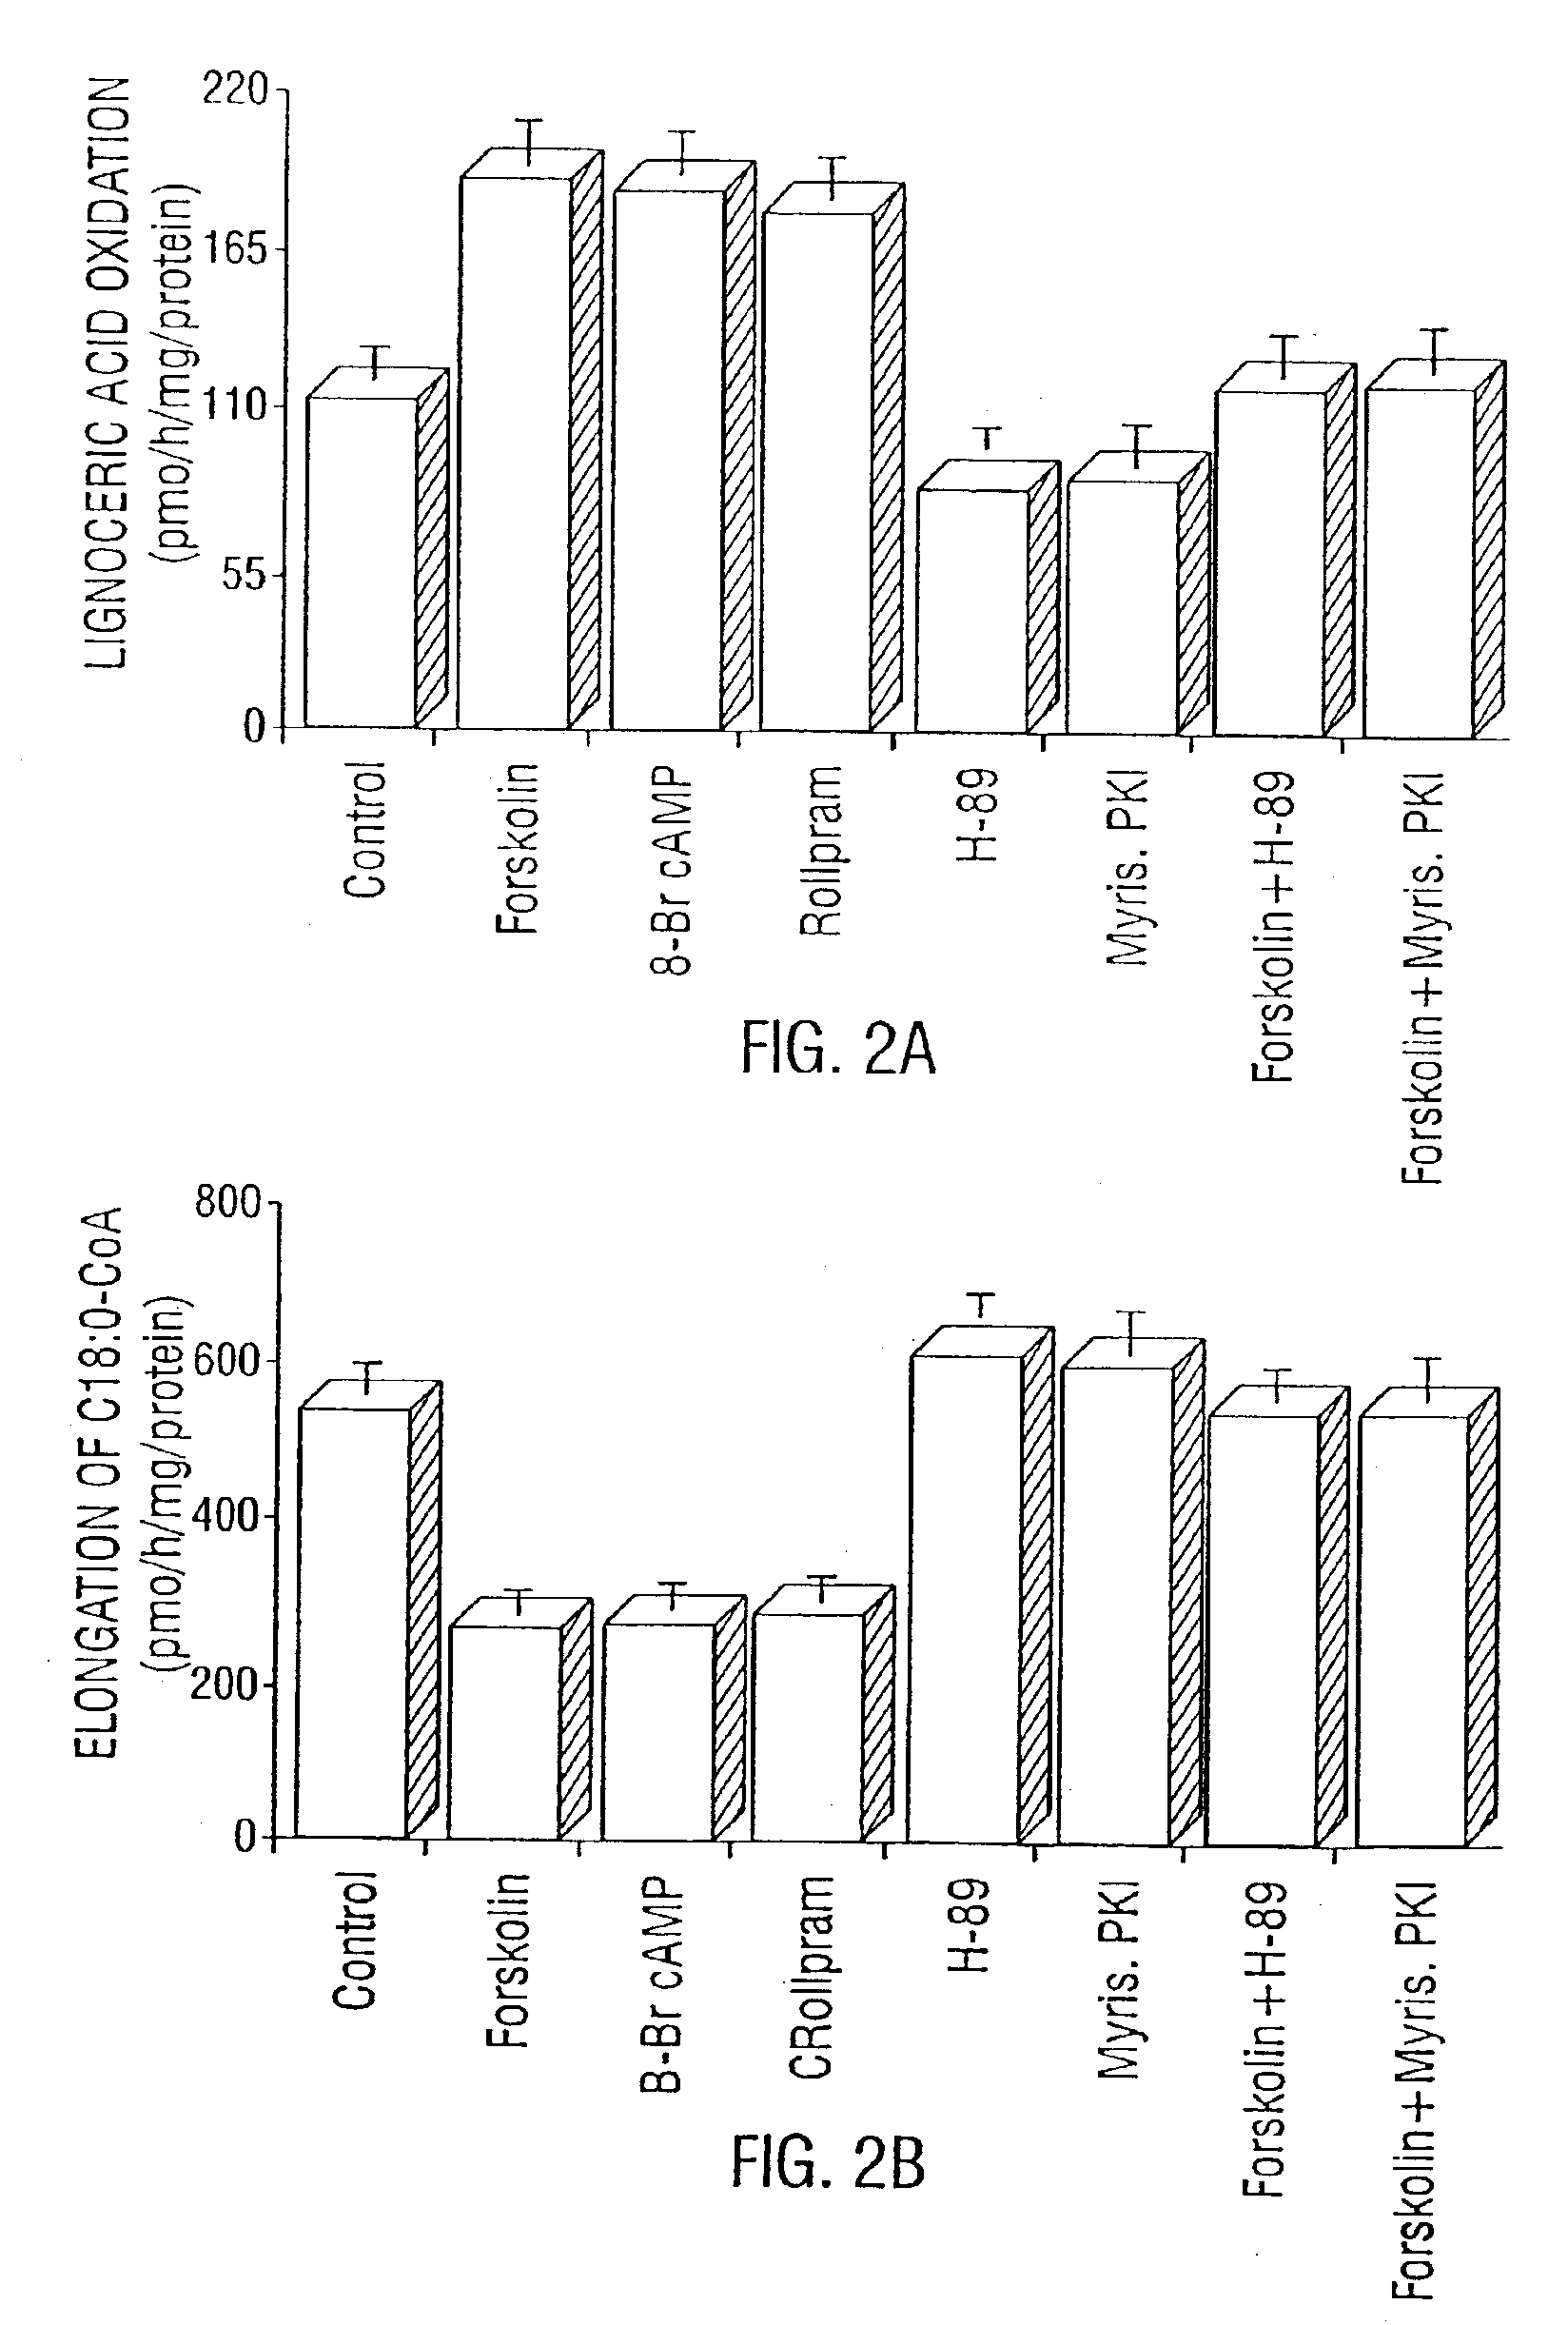 Methods for suppressing the induction of nitric oxide synthase in a cell